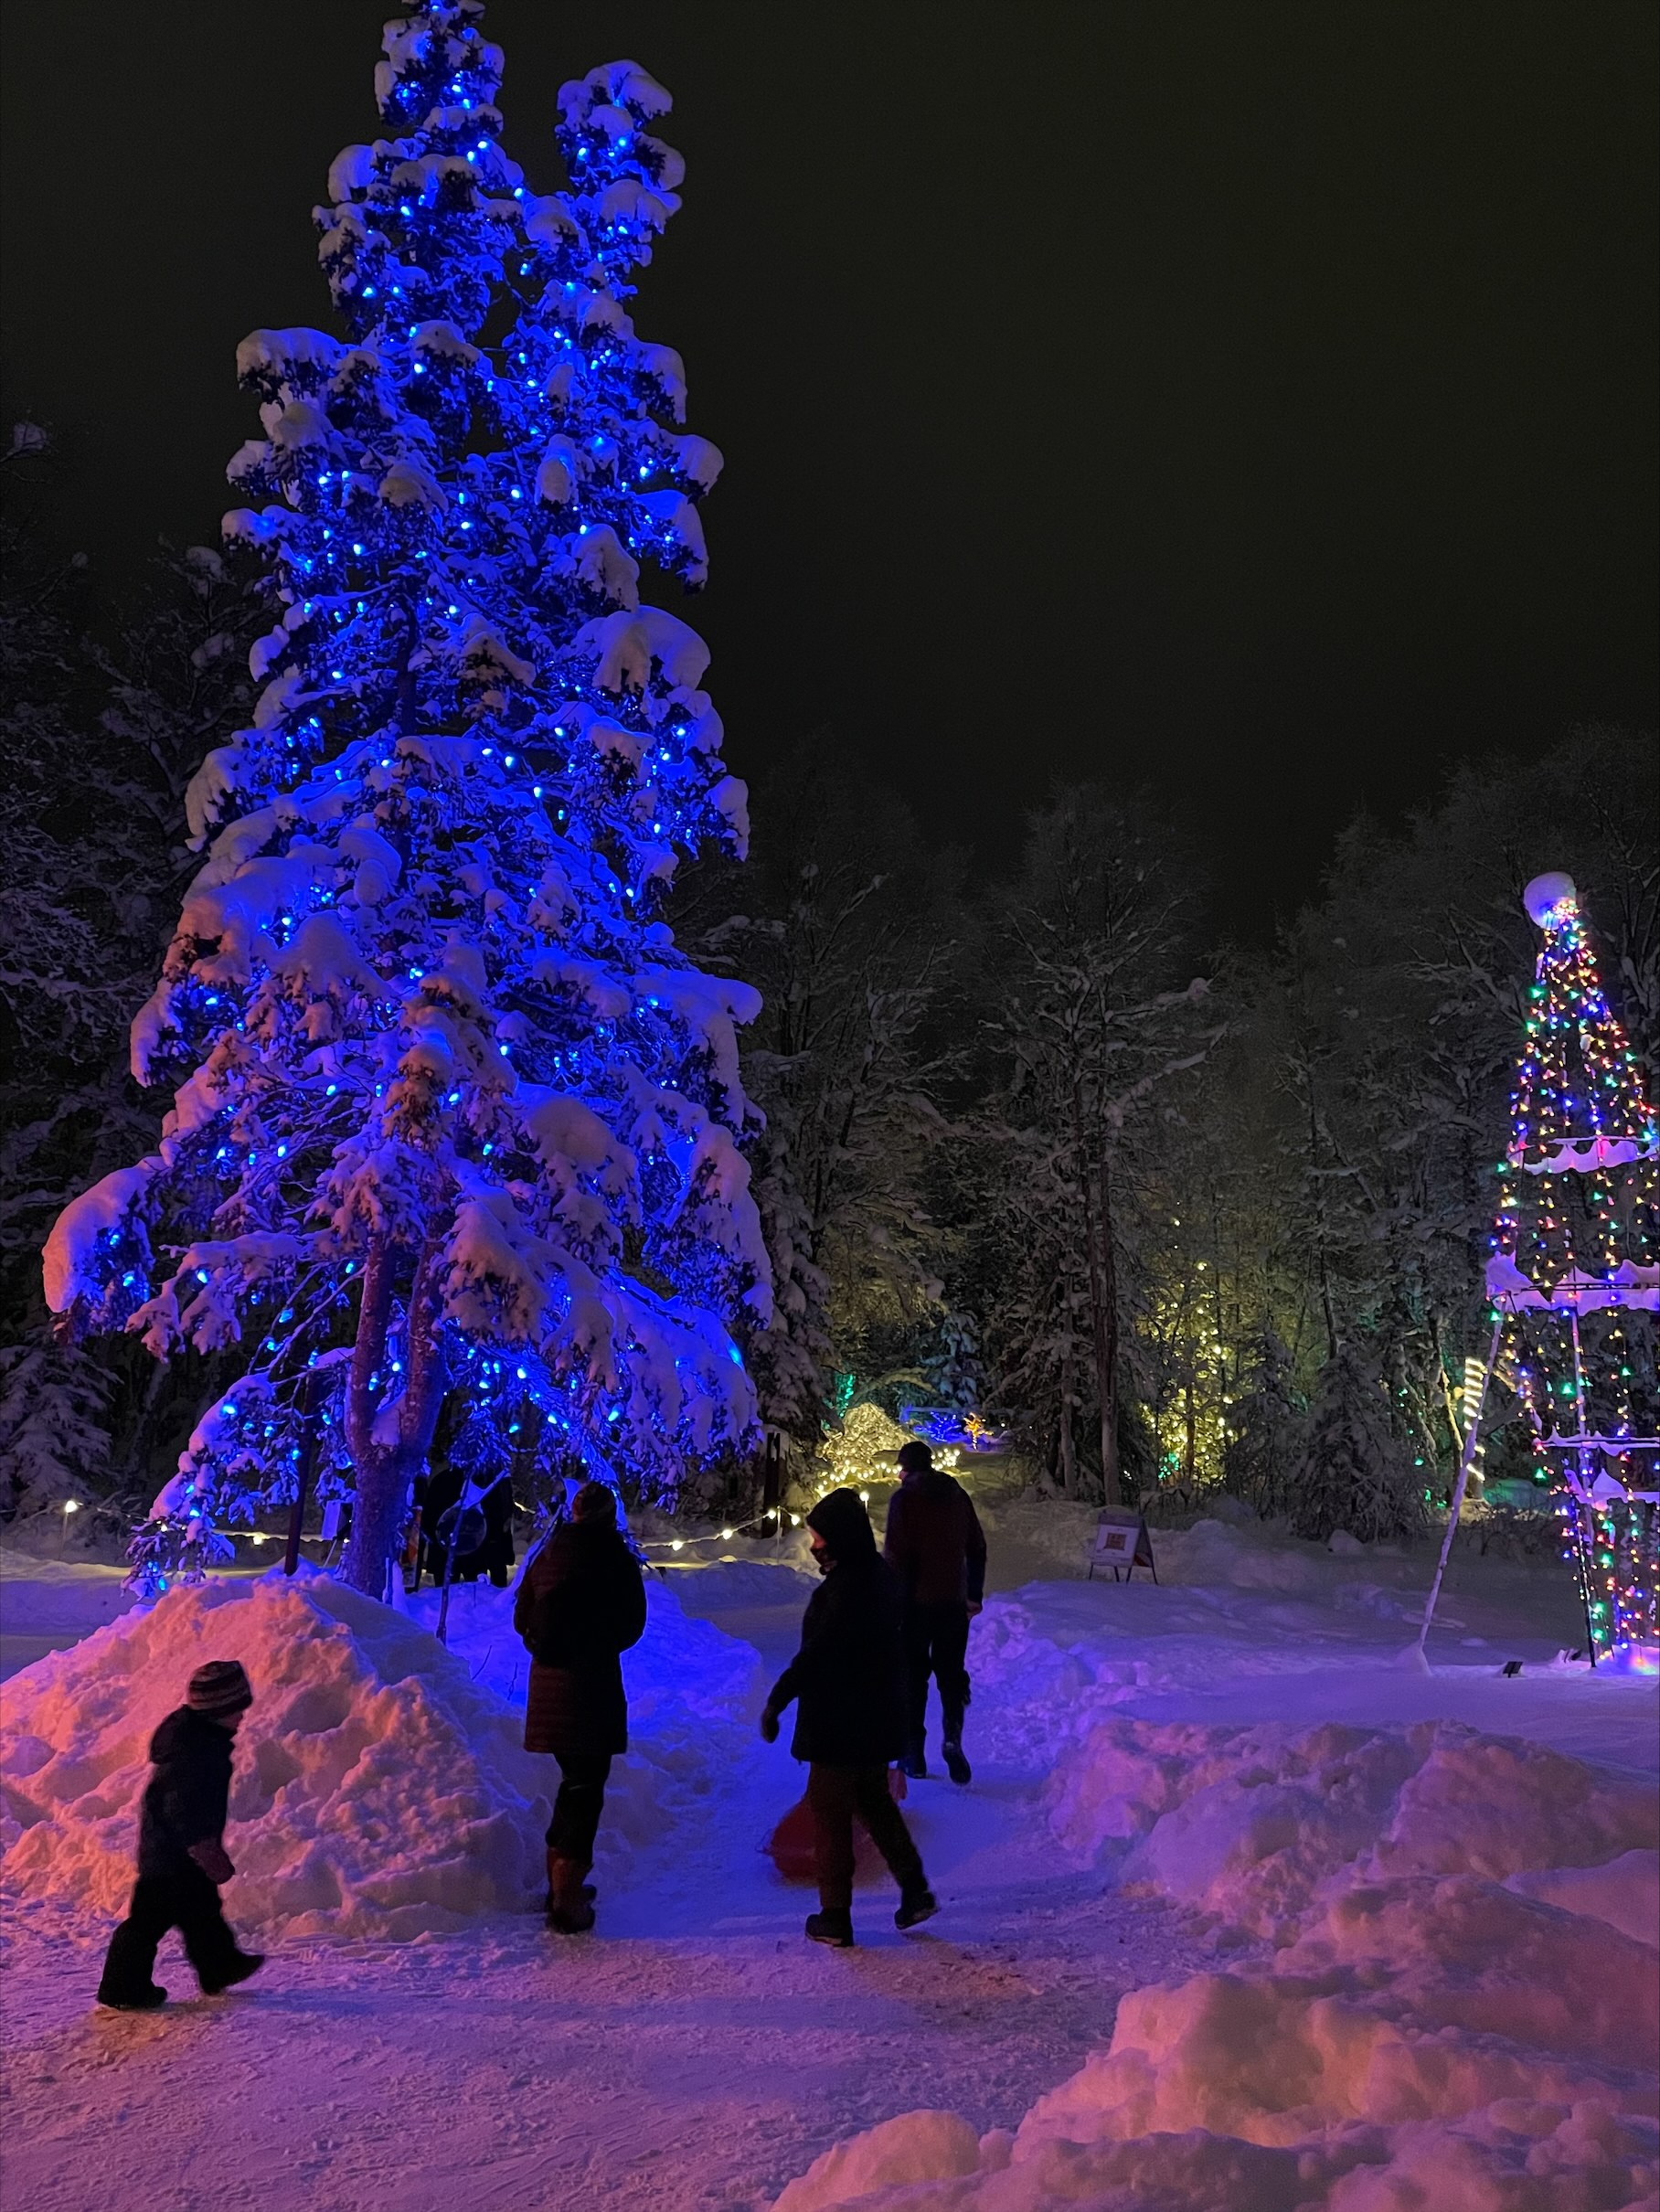 Solstice trees and holiday wishes from Anchorage Alaska Public Media